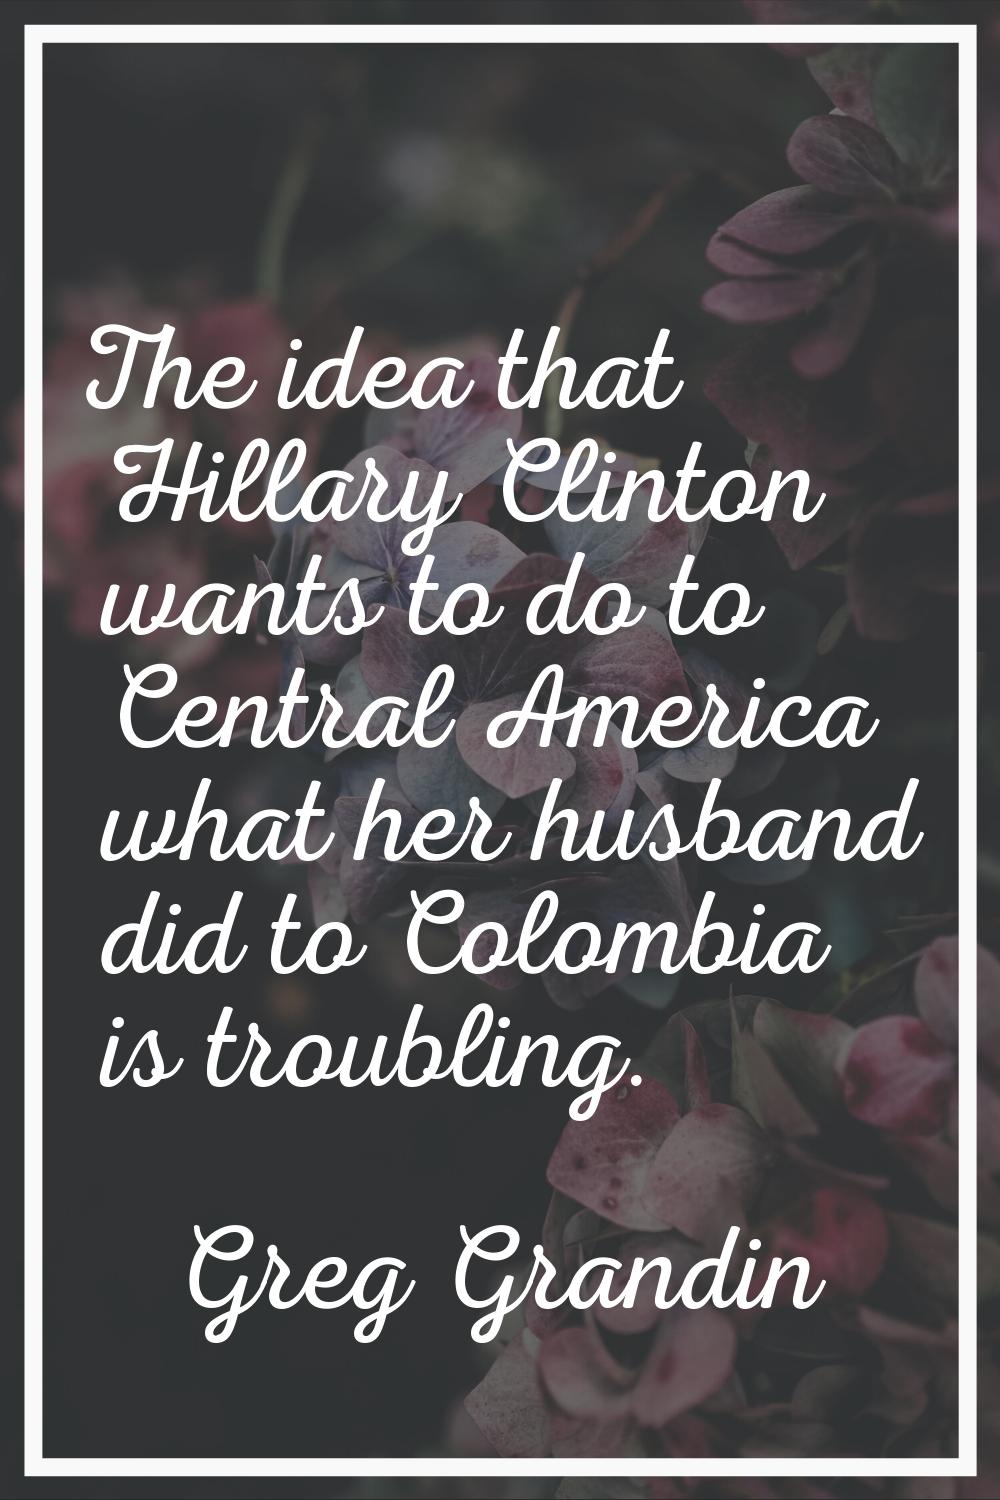 The idea that Hillary Clinton wants to do to Central America what her husband did to Colombia is tr